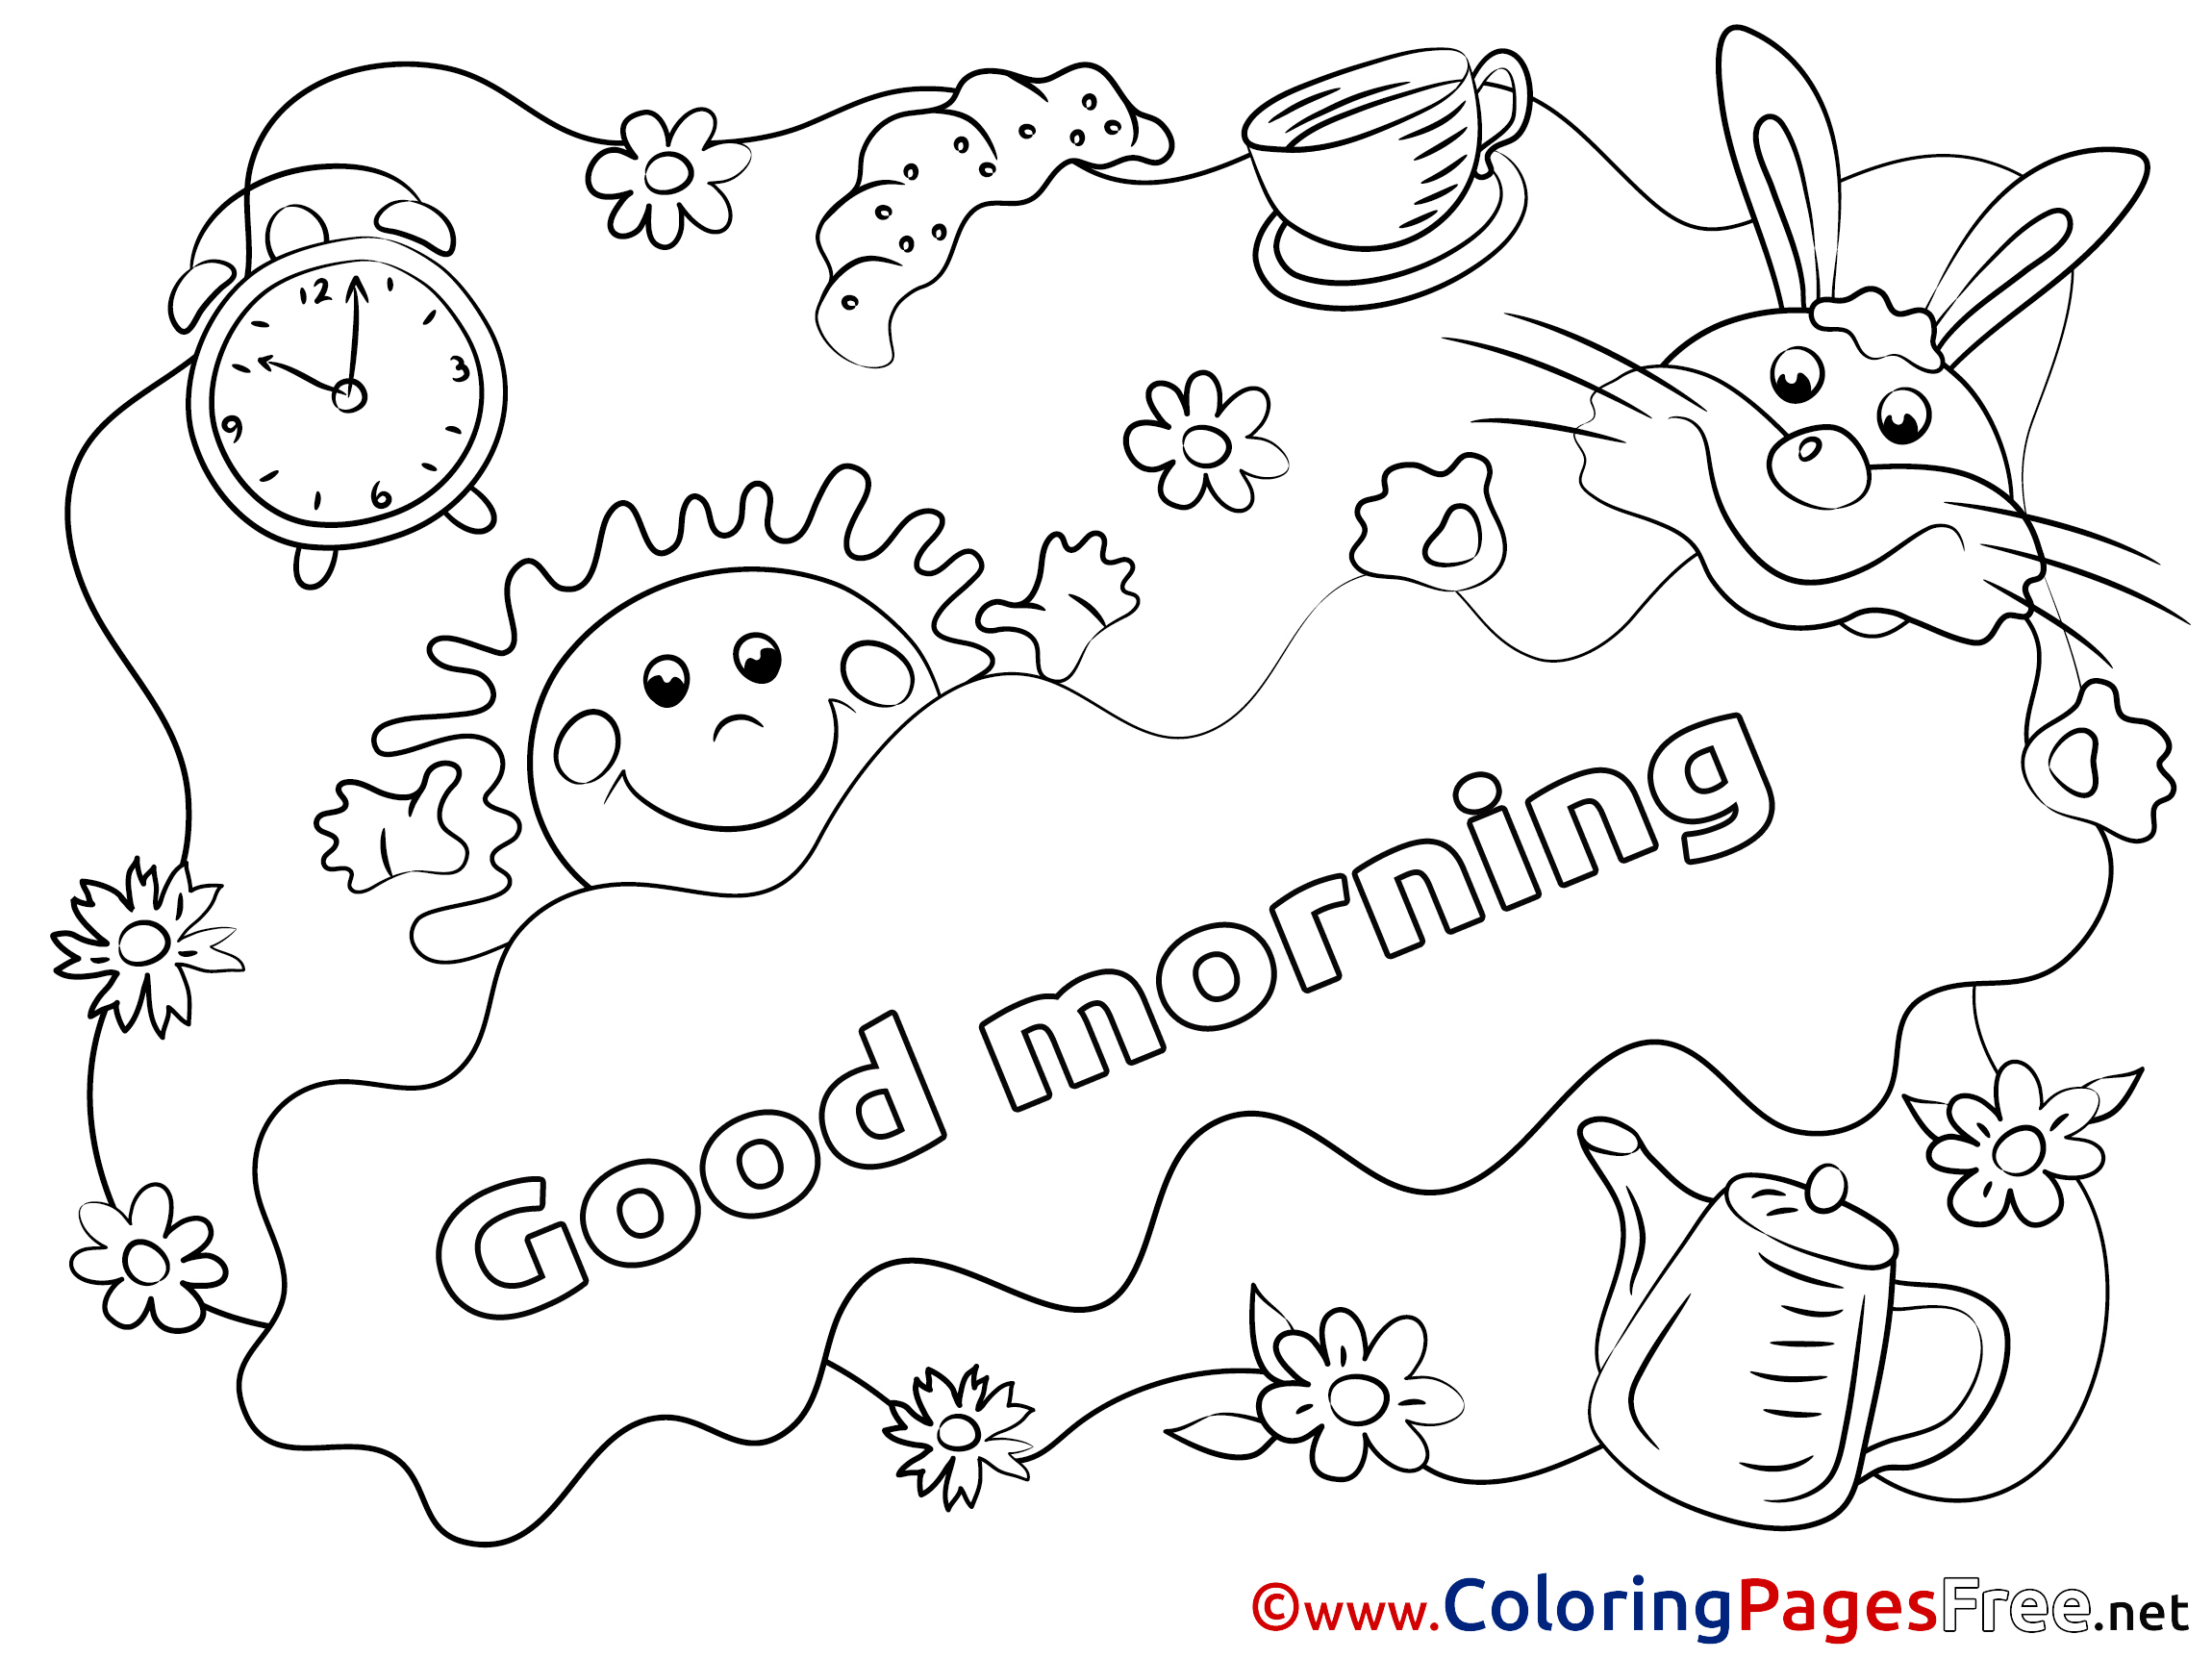 good-morning-cards-wishes-greetings-messages-quotes-2023-wishes